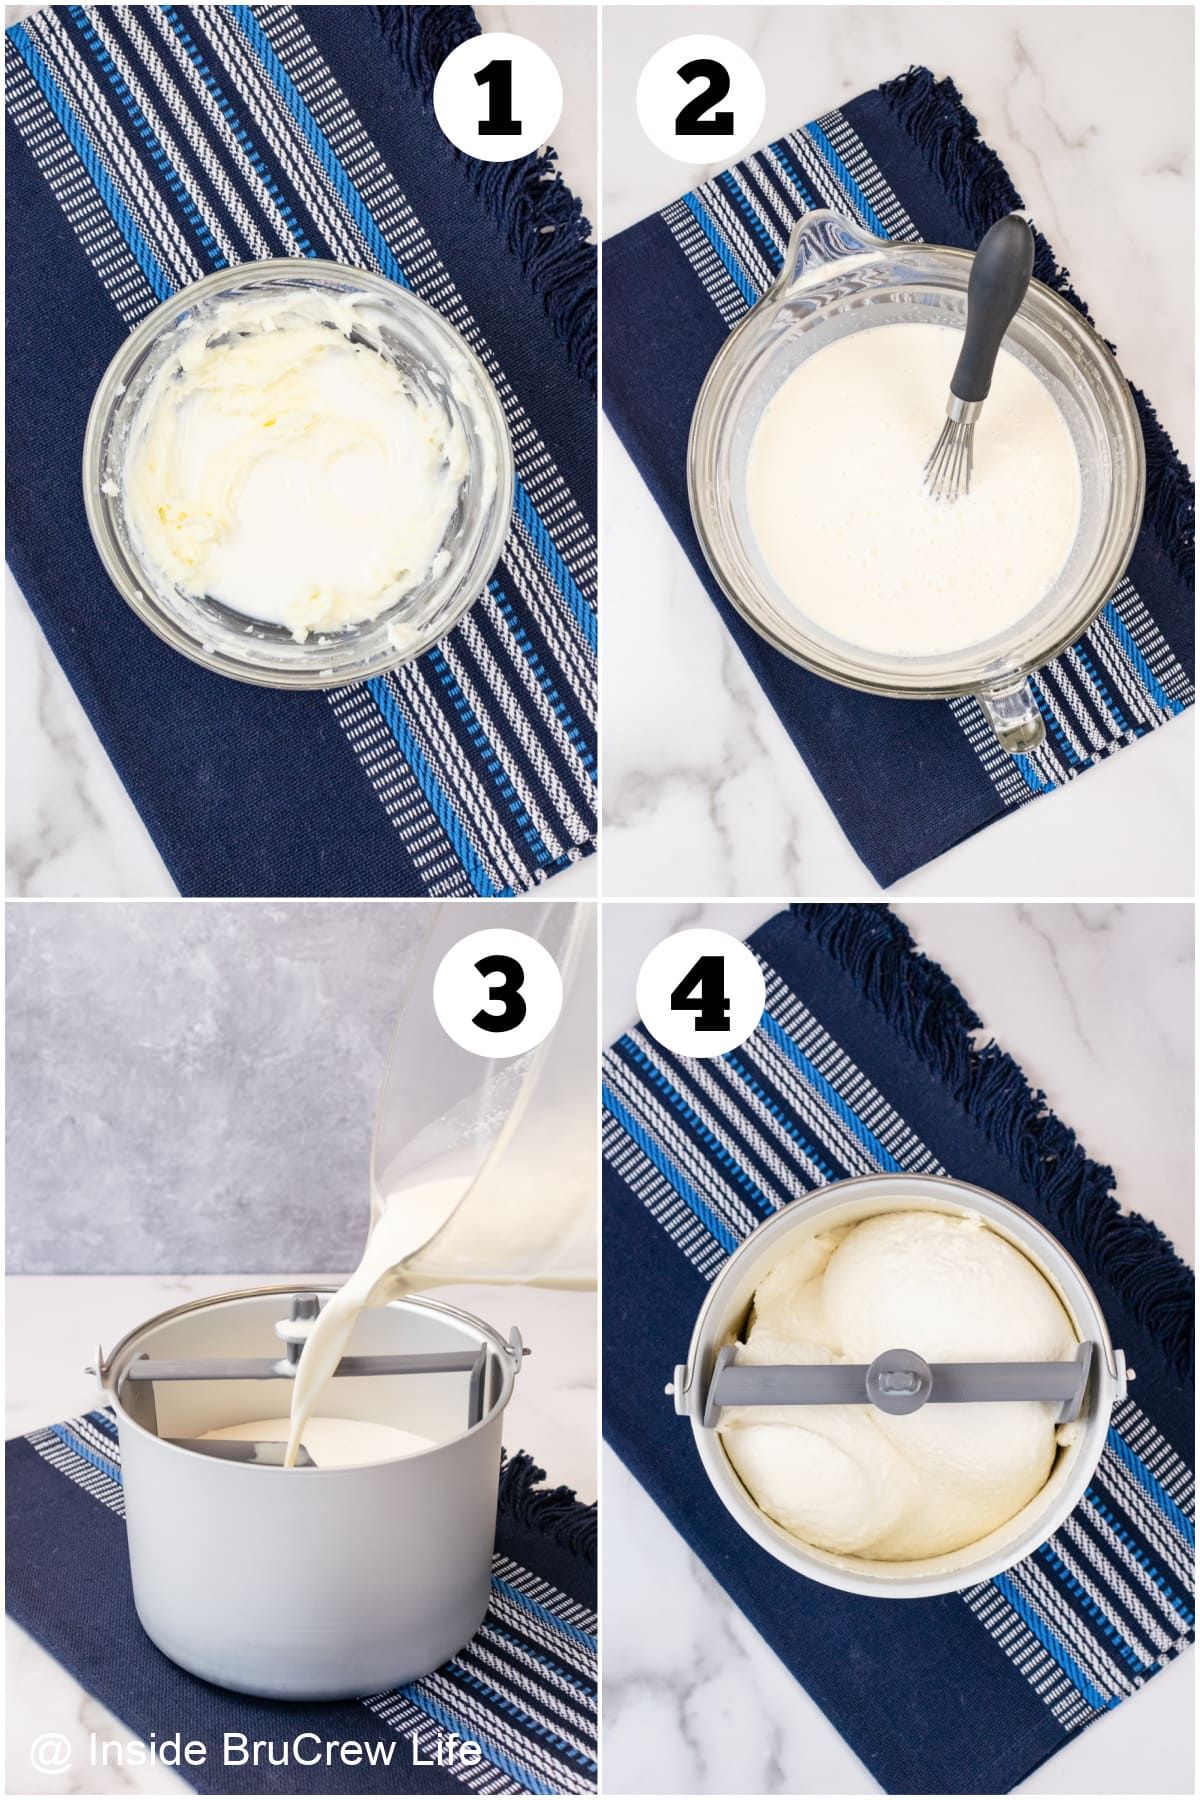 Four pictures collaged together showing how to make homemade ice cream.